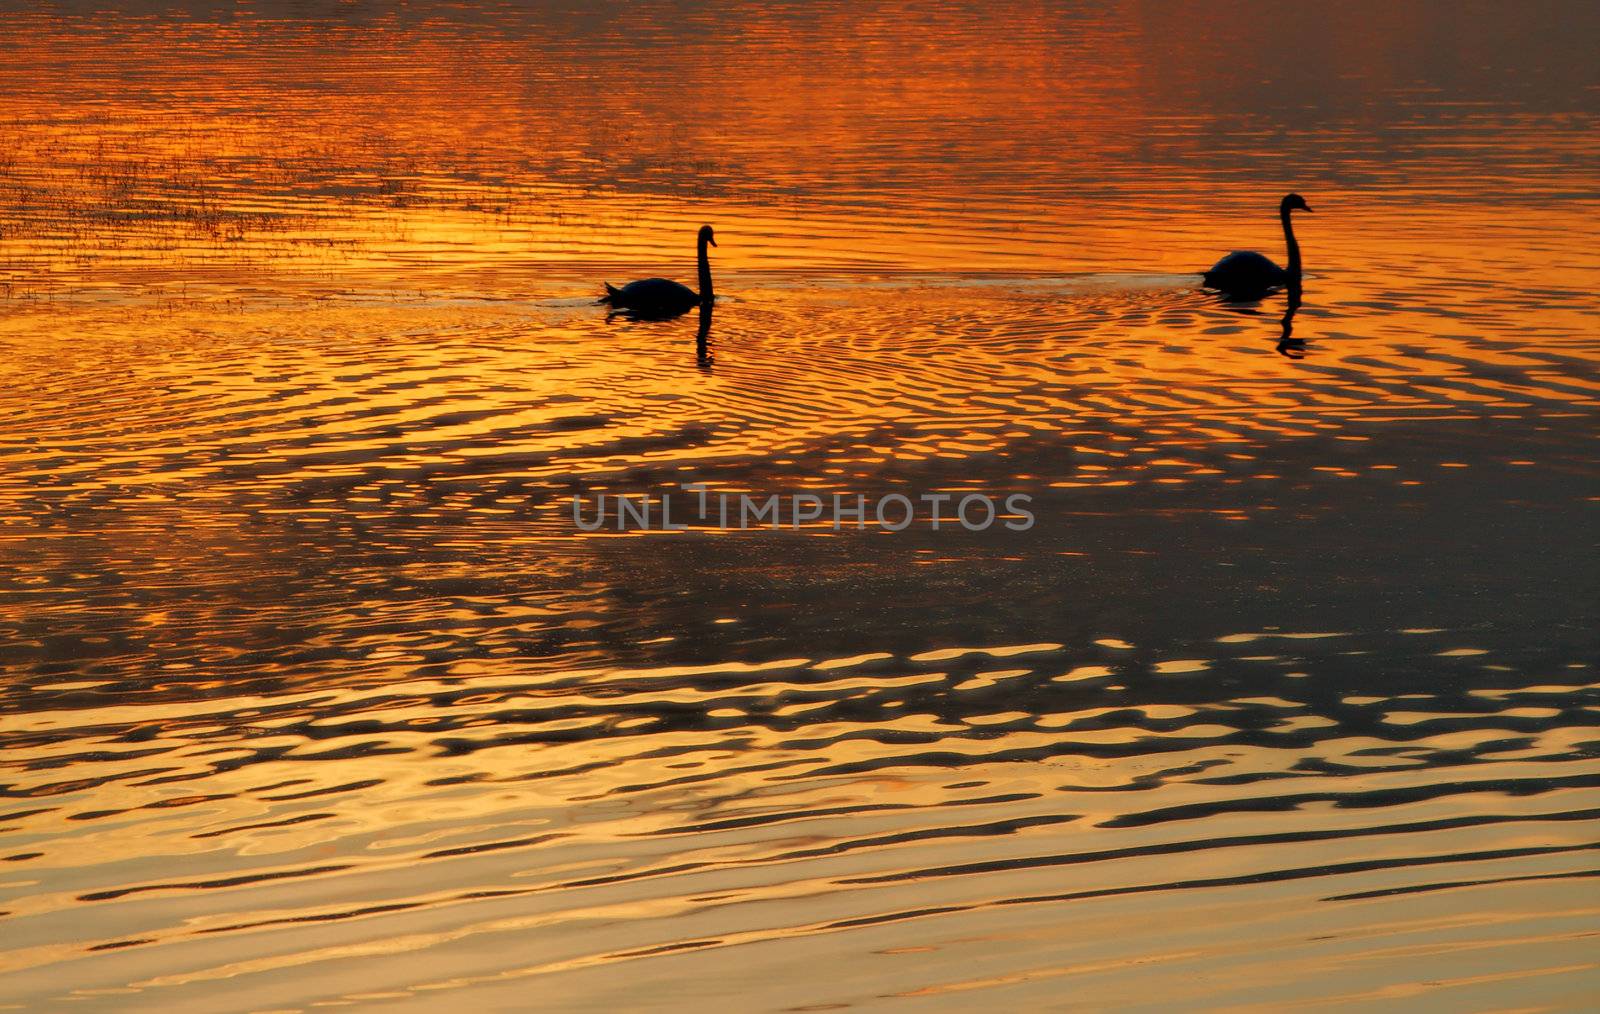 Swan Lake Sunset with beautiful animals and water reflection